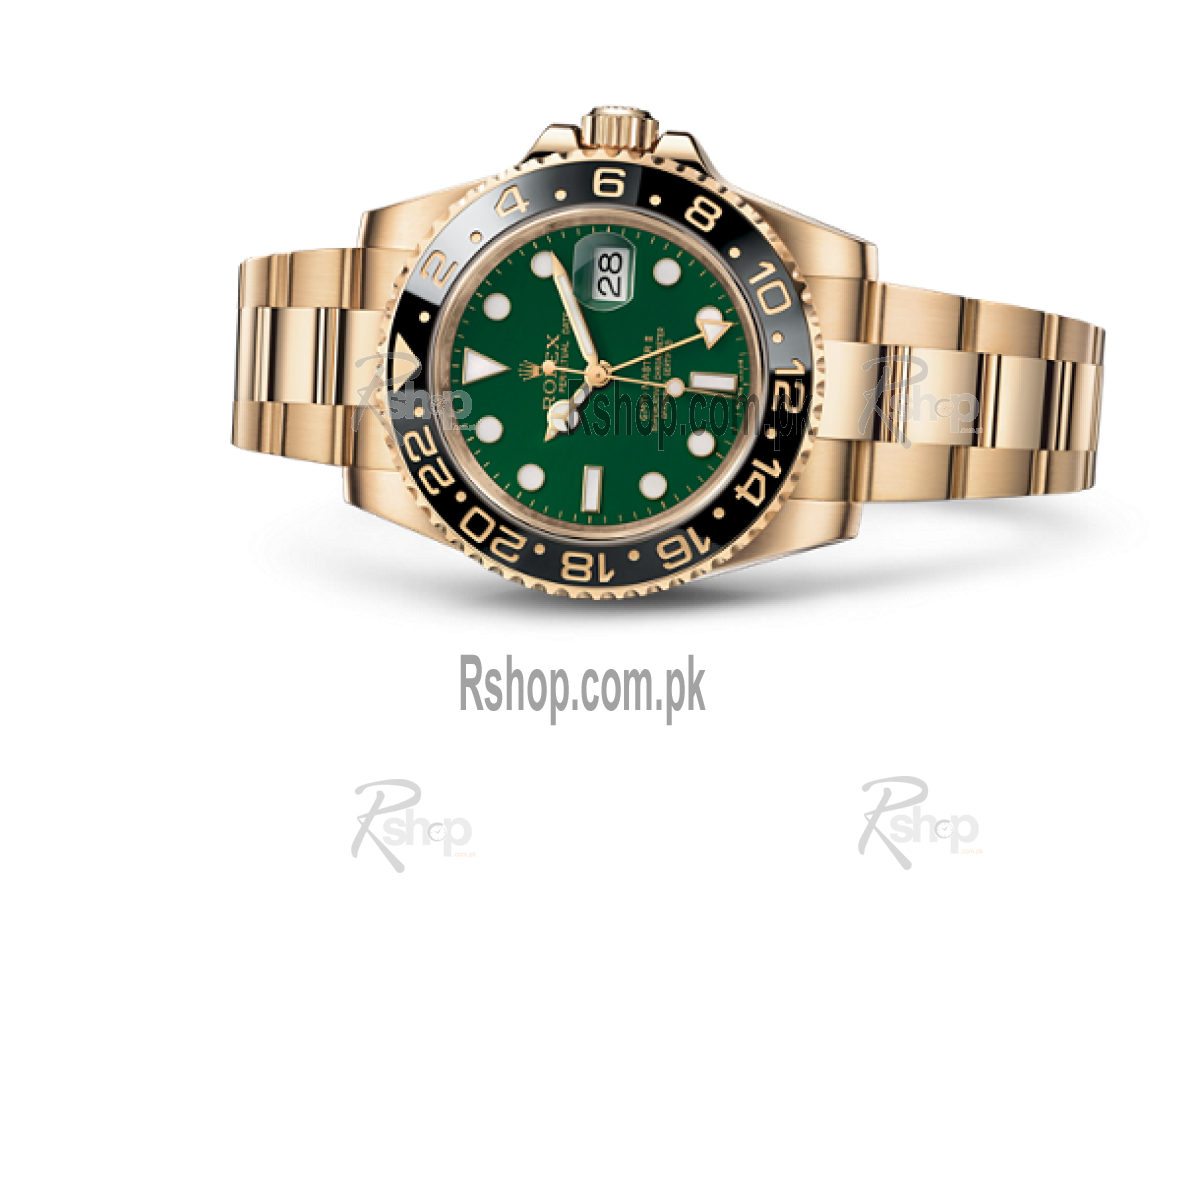 Daytona Gmt-Master Perpetual Watch Rolex Ii Oyster Clipart